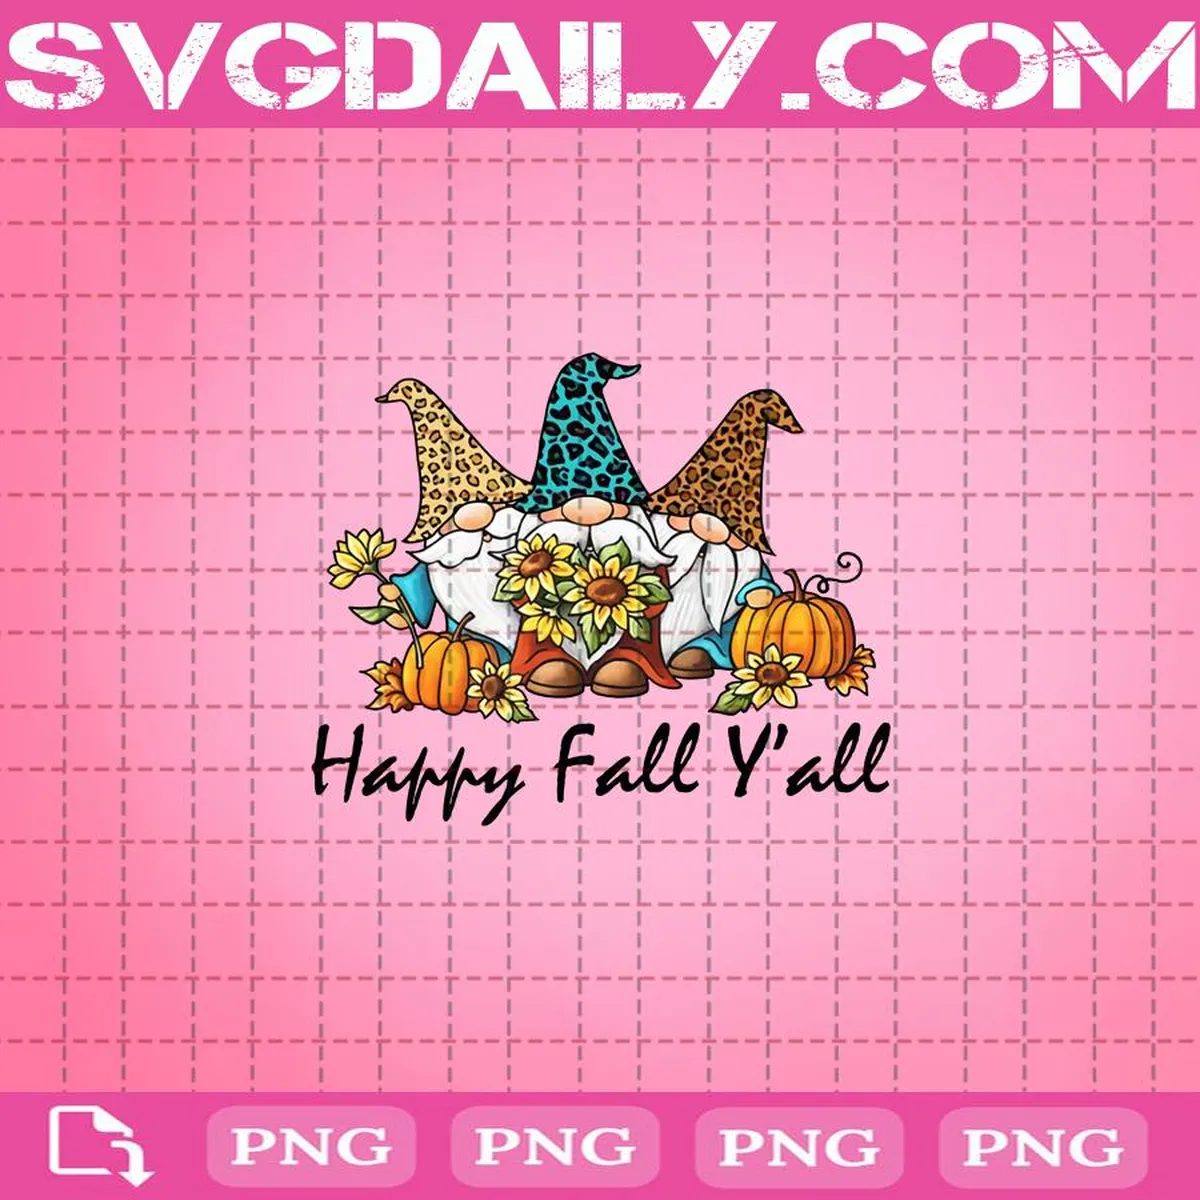 Happy Fall Y’all Png, It's Fall Y’all Gnome Png, Gnome Png, Peace Love Fall Png, Gnome Halloween Png, Gnome Pumpkin Png